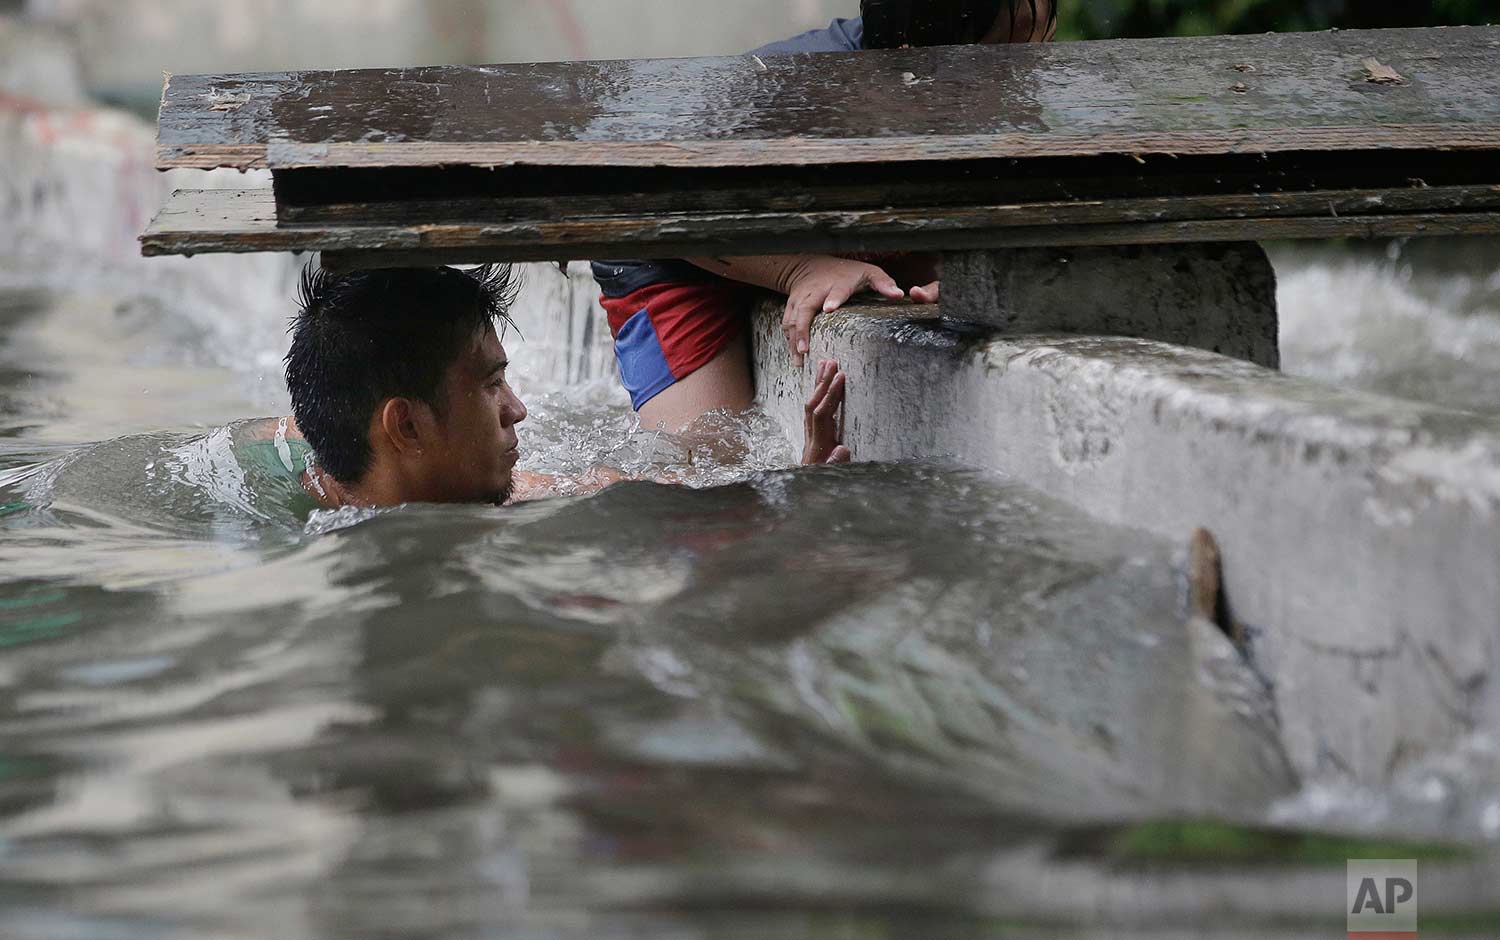  A man swims in a swollen creek as floodwaters continue to rise due to Tropical Depression Maring in Manila, Philippines, on Tuesday, Sept. 12, 2017. Classes in schools and work in government offices have been suspended in the capital and nearby prov